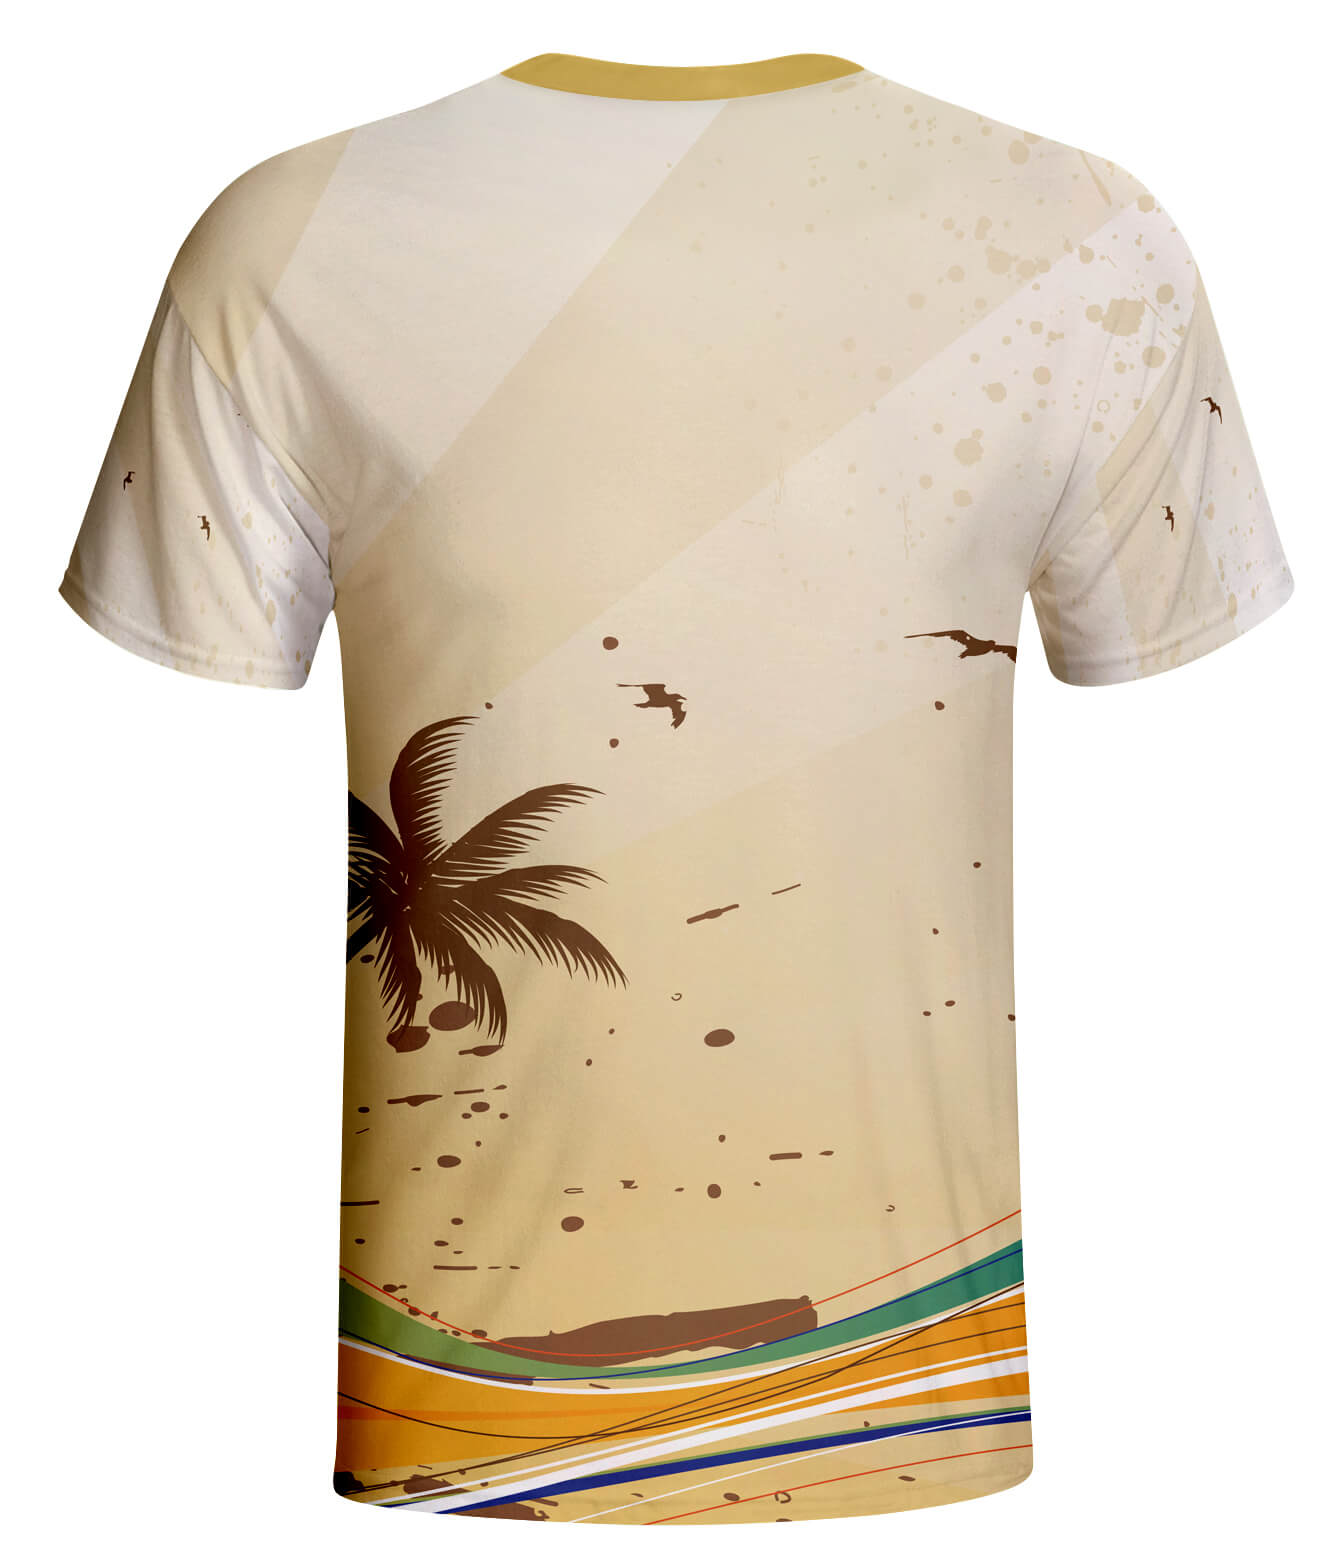 Sublimated 100% Polyester Good Quality Tee Customize Your Color And Patterns You Need